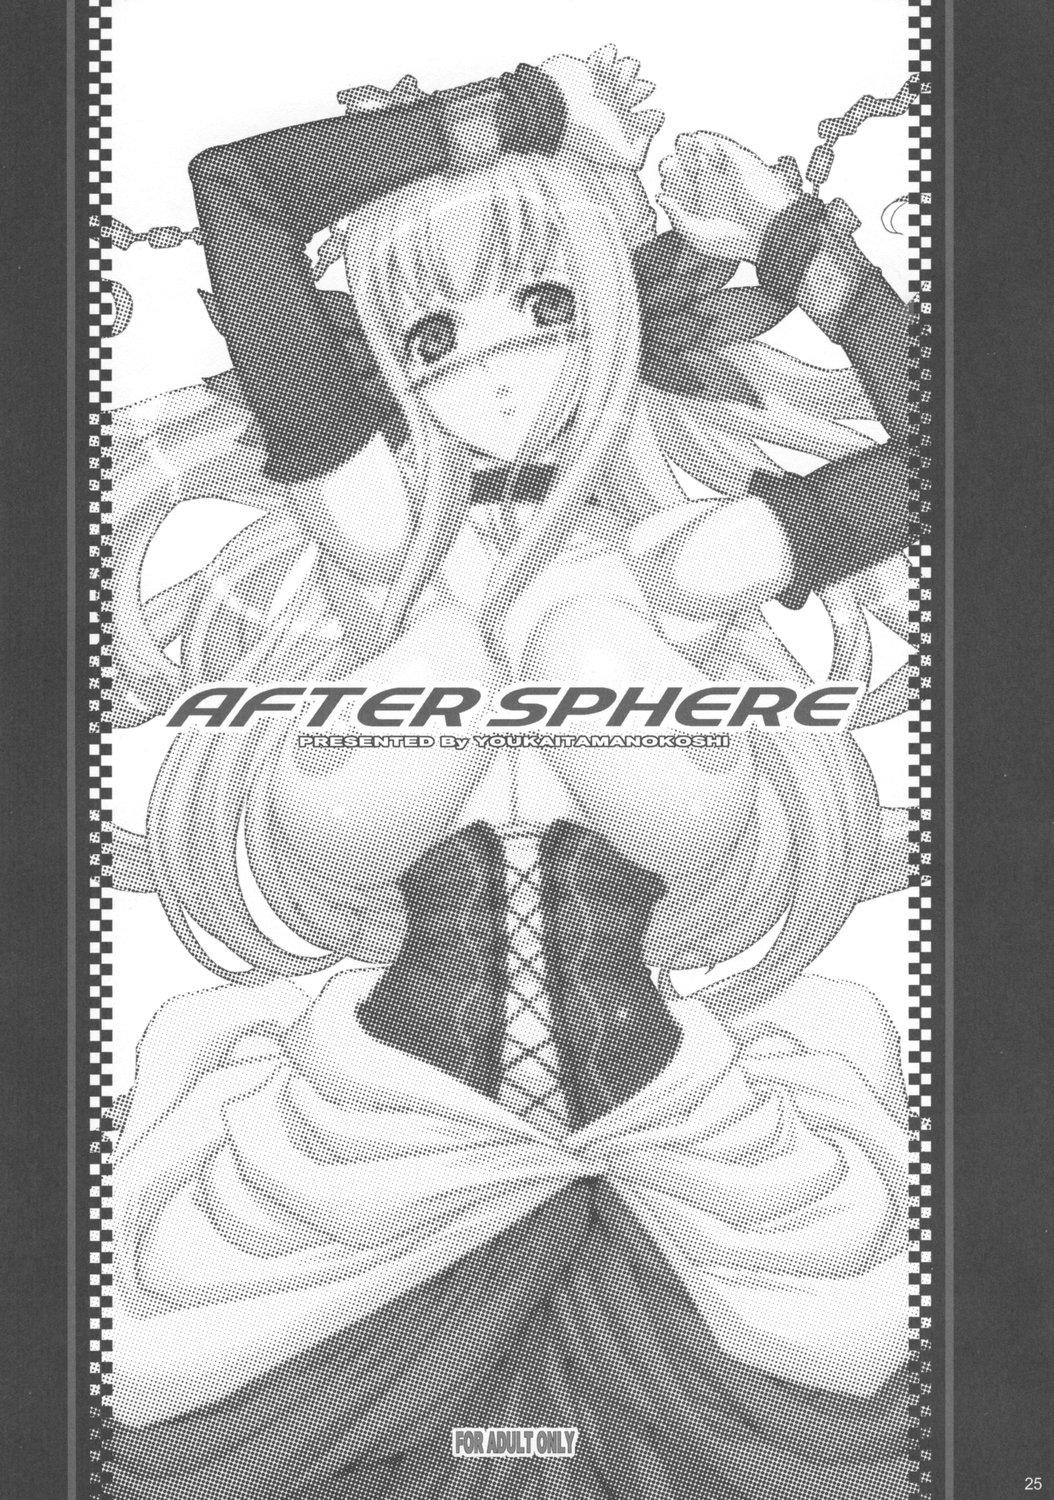 After Sphere 23